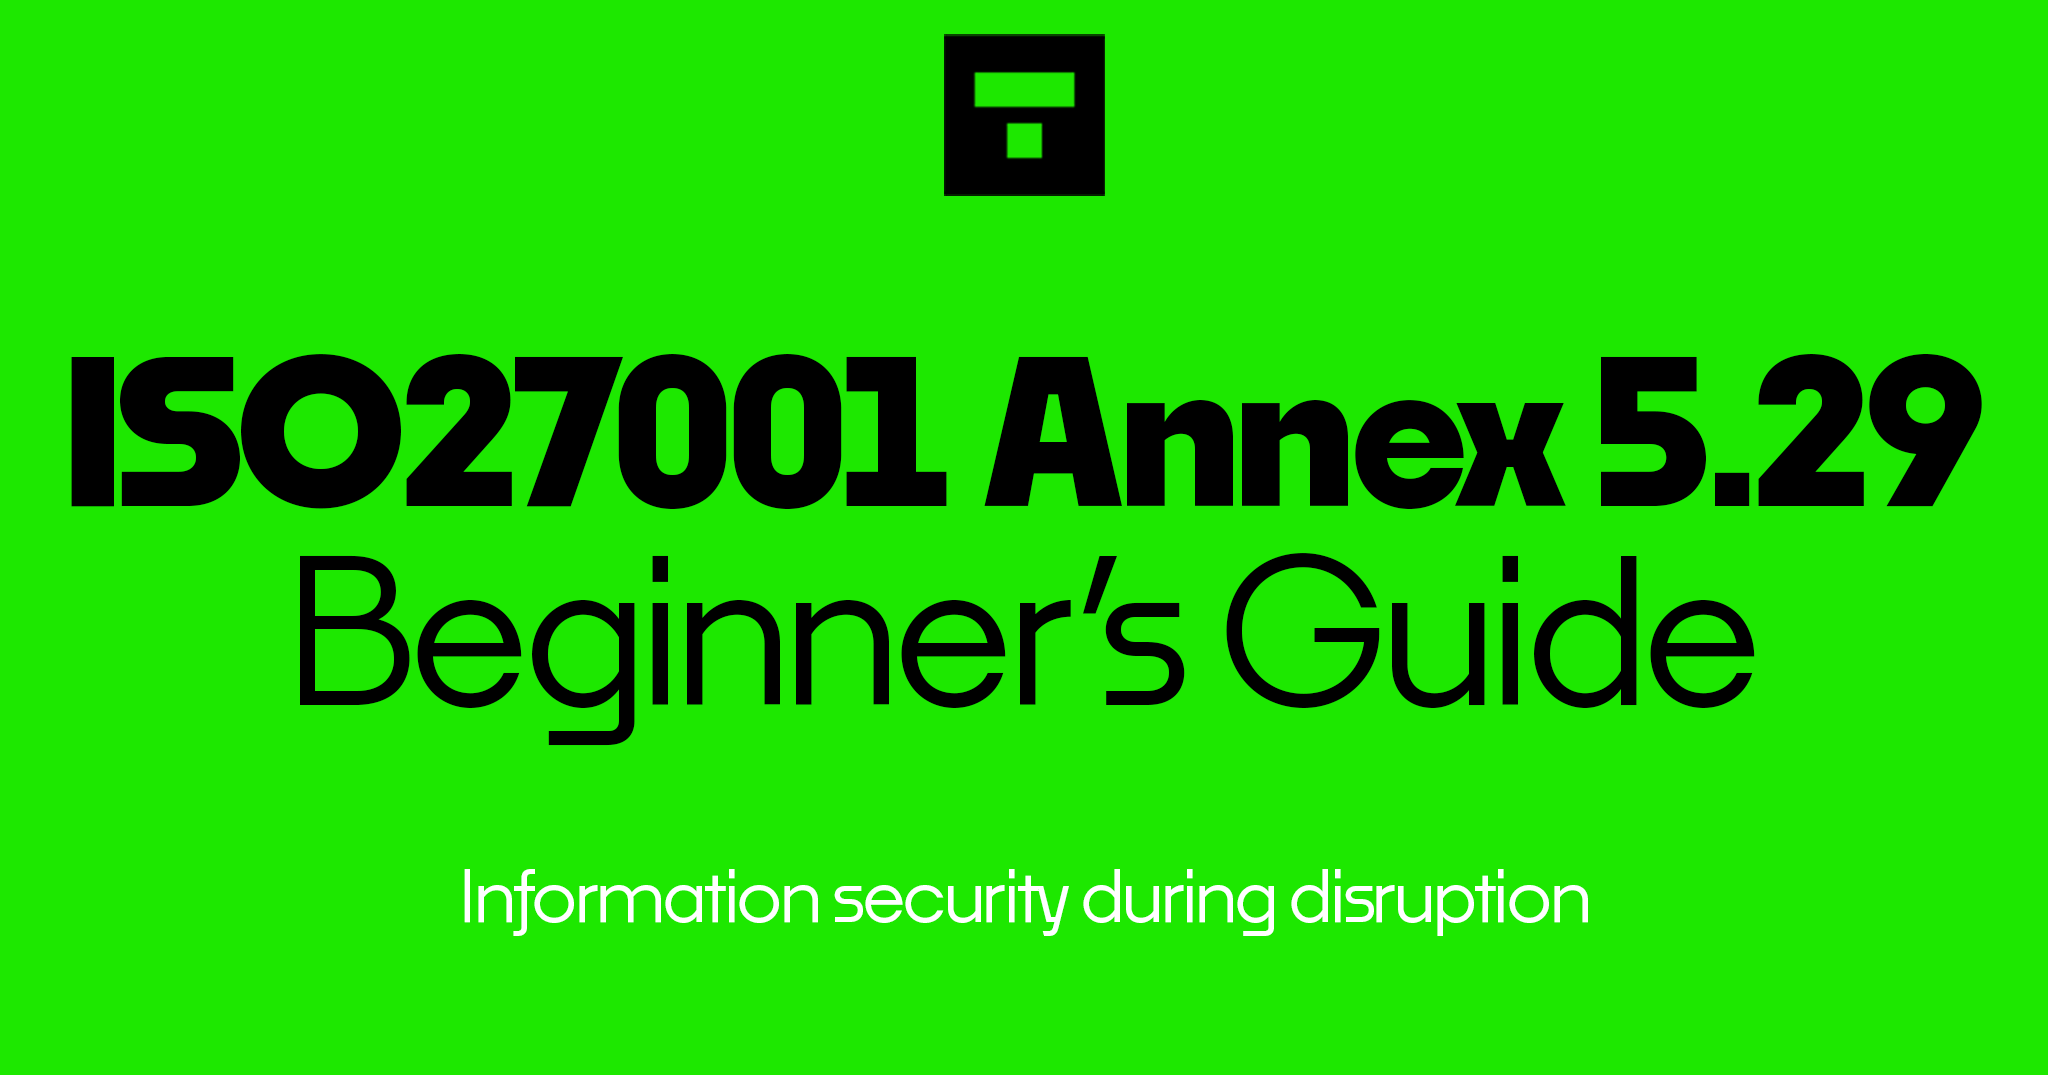 ISO 27001 Annex A 5.29 Information security during disruption Beginner's Guide